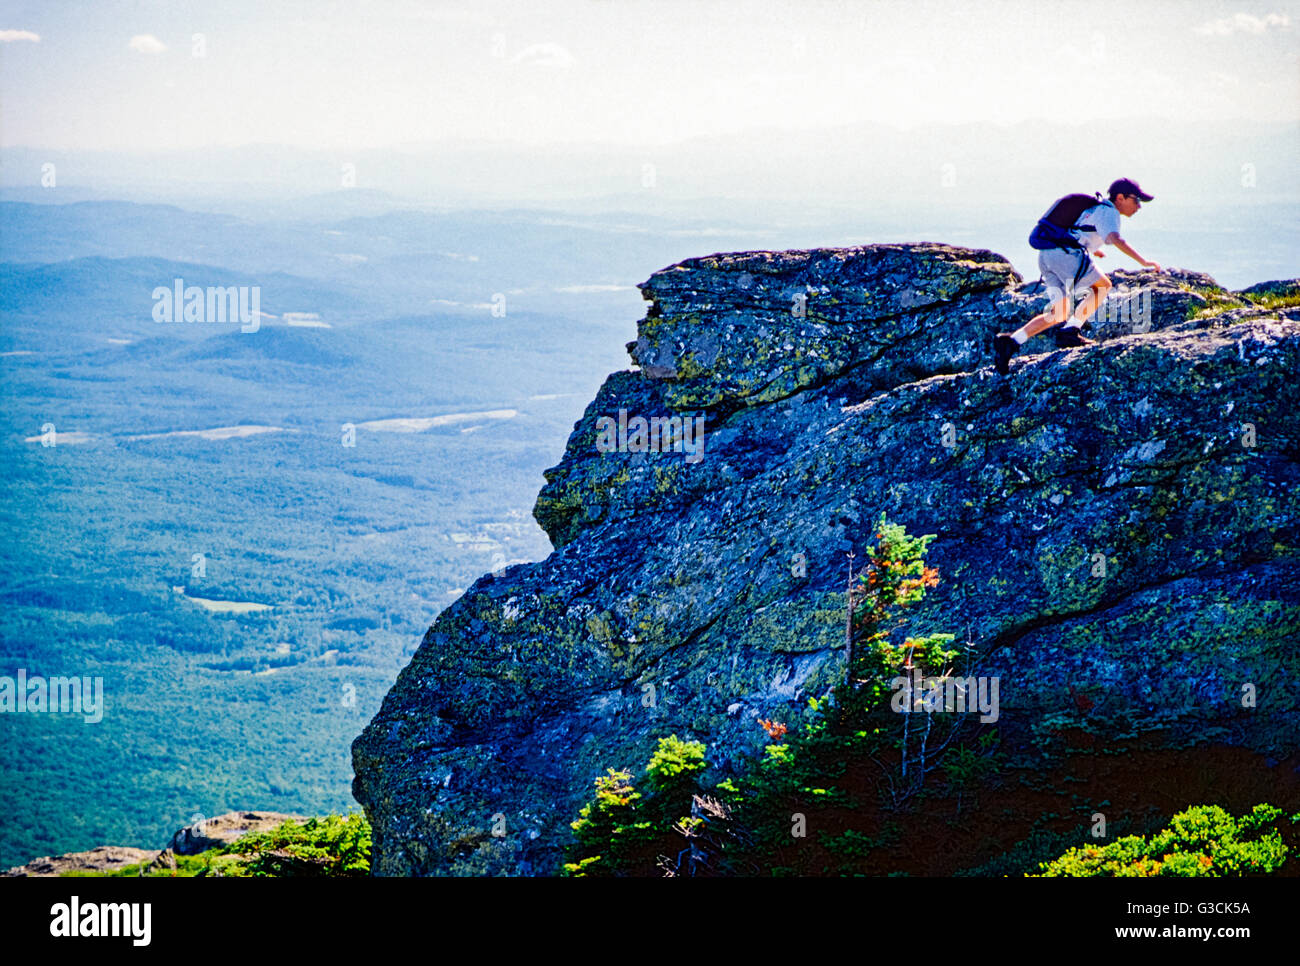 Hikers on Mt. Mansfield (4393') in the Green Mountains, Stowe, Vermont, USA Stock Photo